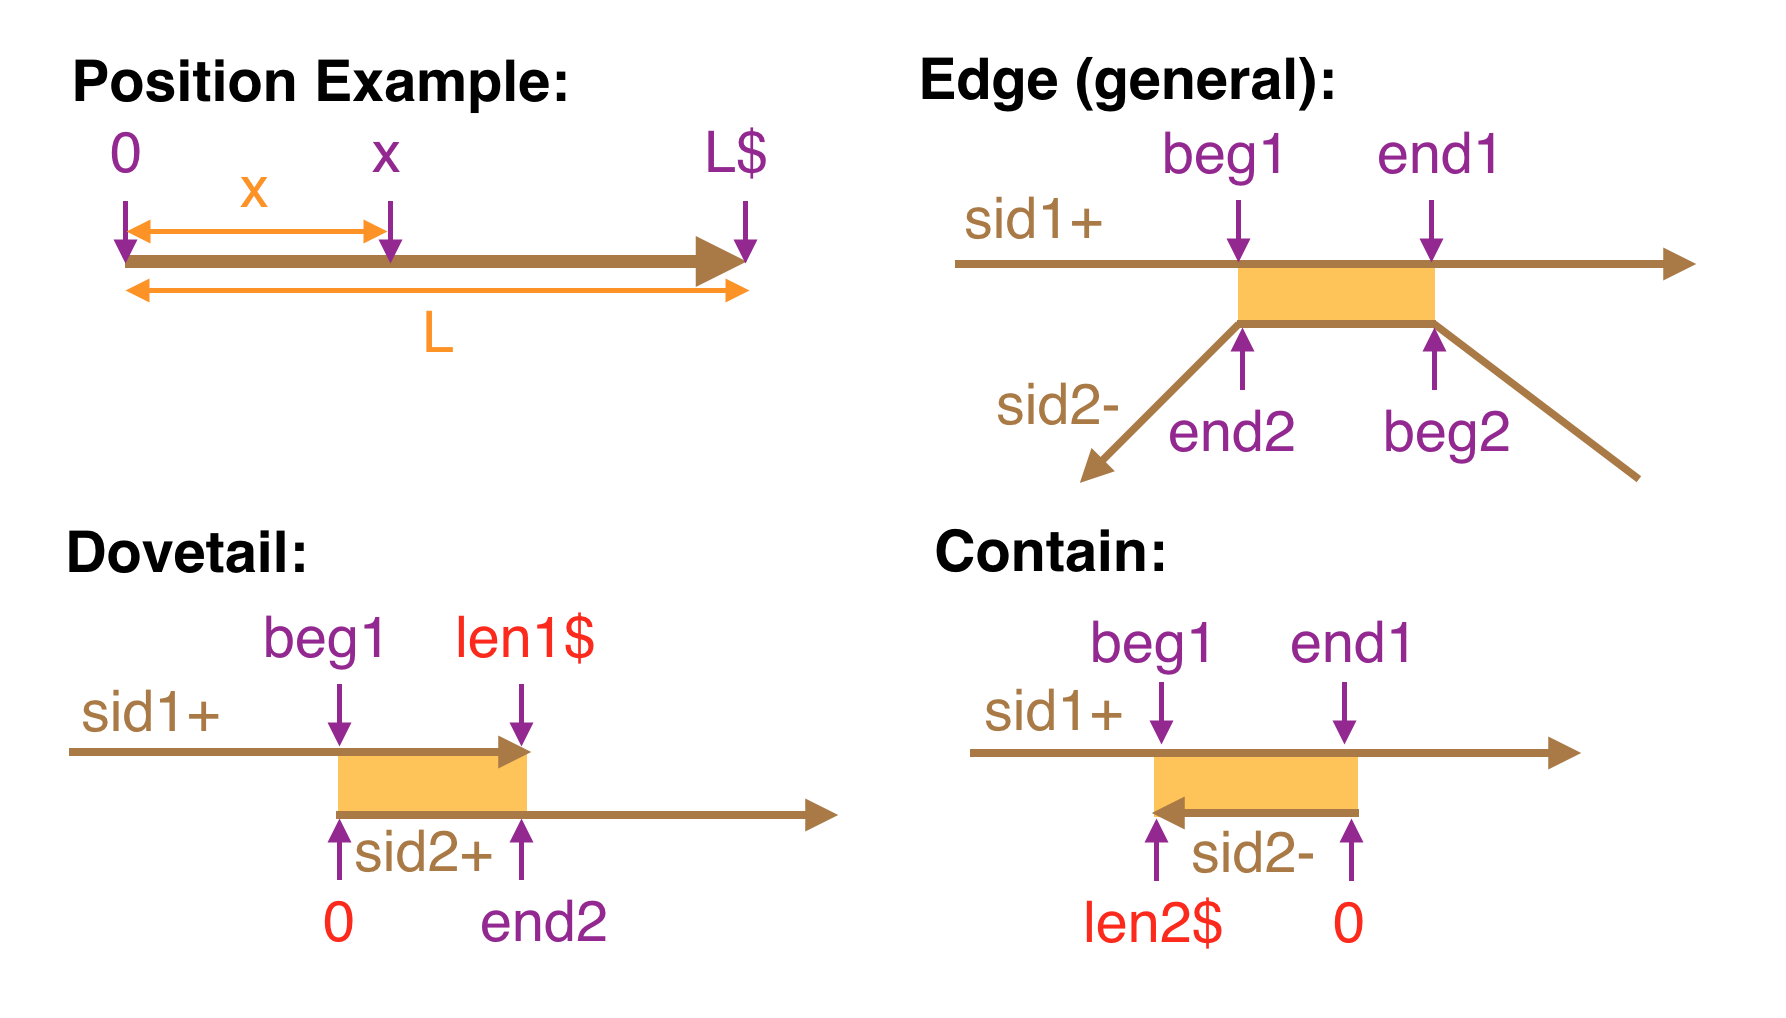 Illustration of position and edge definitions